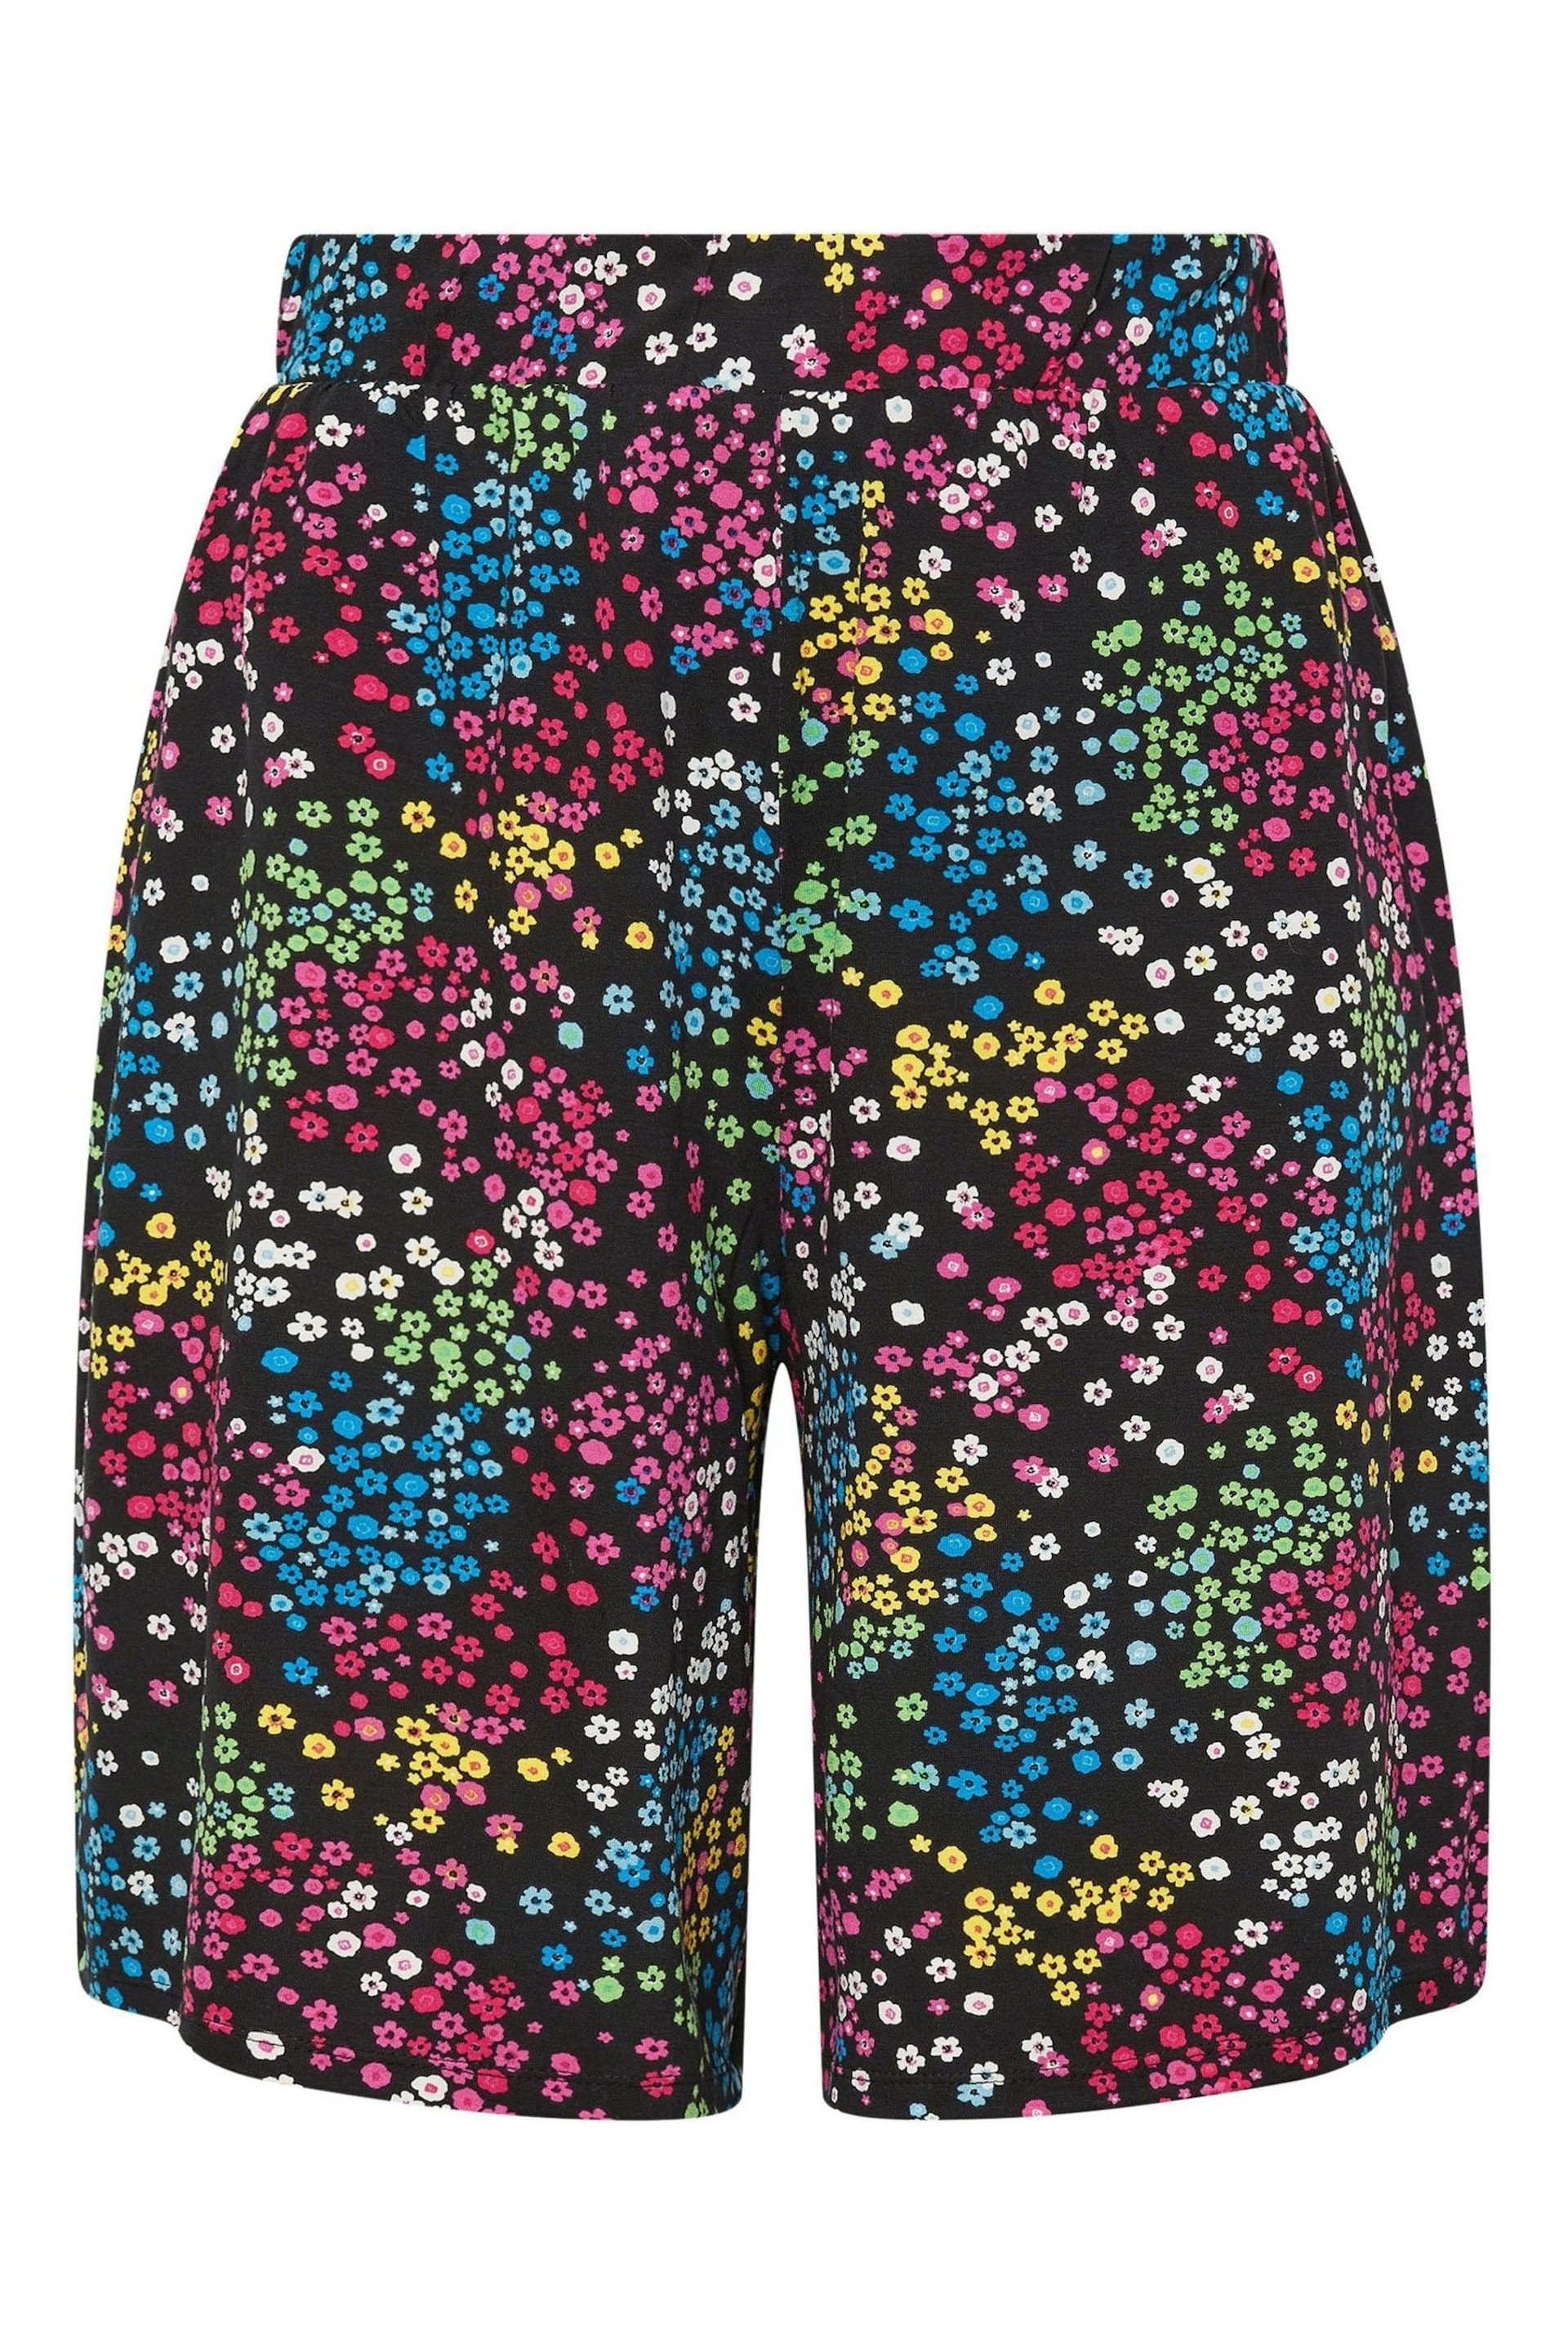 Yours Curve Black Rainbow Ditsy Floral Print Jersey Shorts - Image 6 of 6